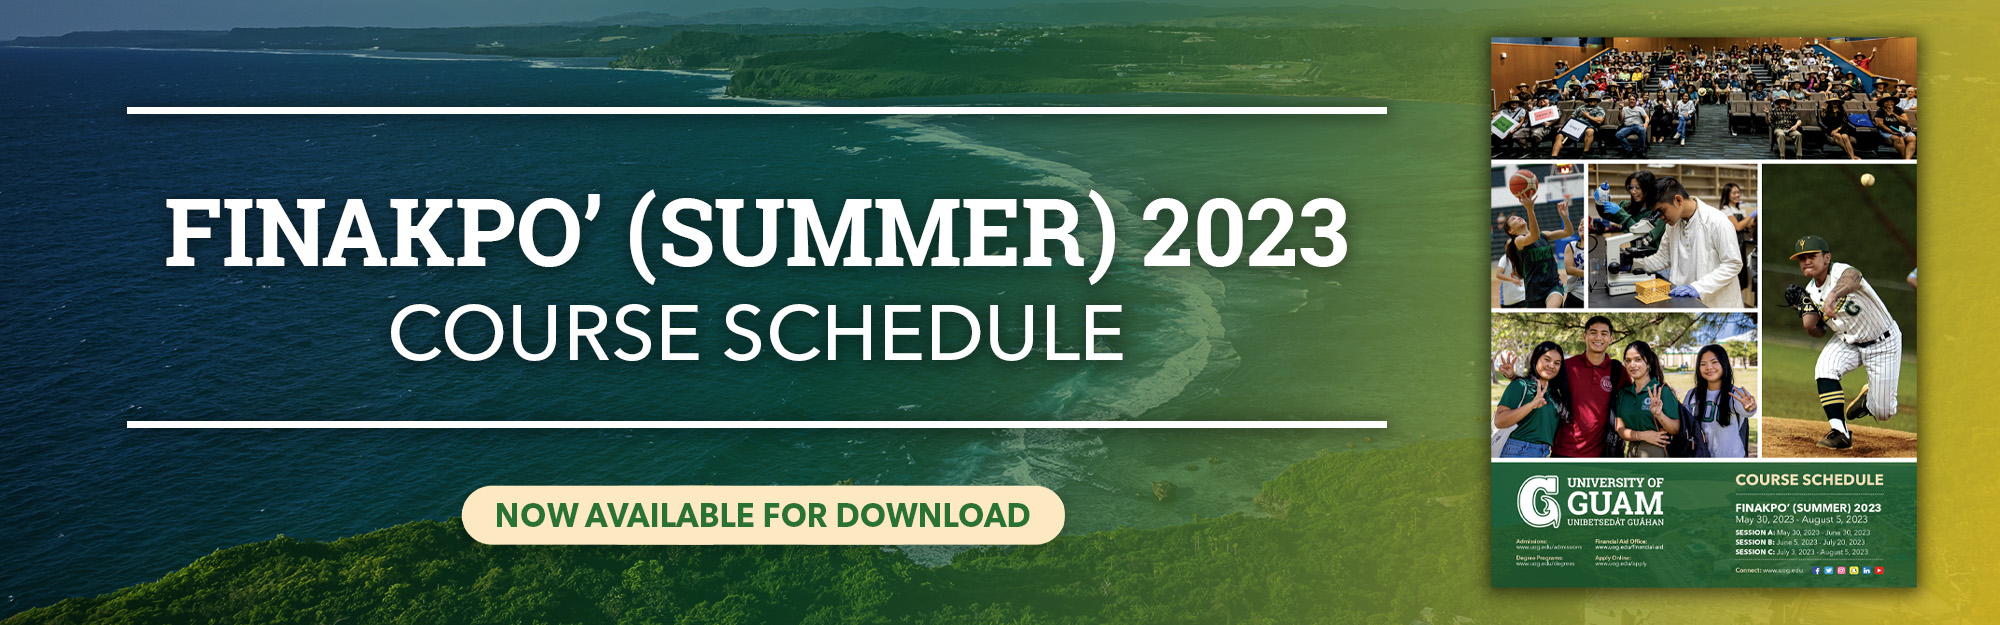 Finakpo' (Summer) 2023 Course Schedule is now available!